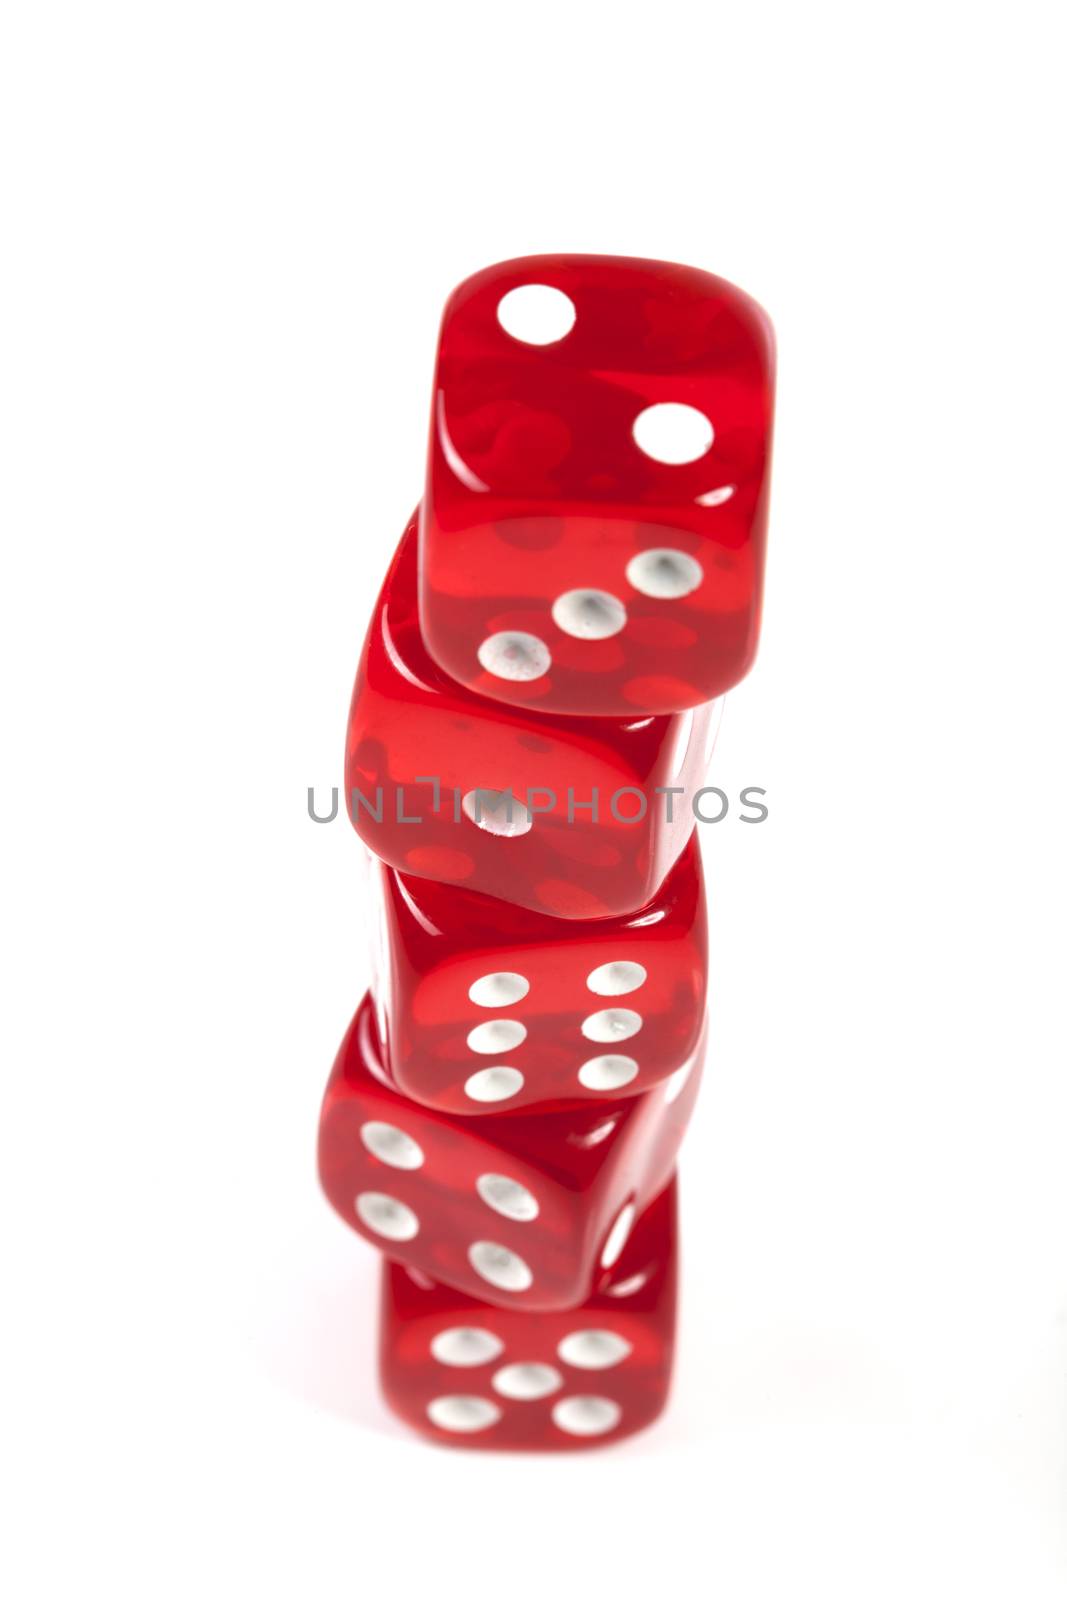 Red Casino Dice Tower Isolated On White Background